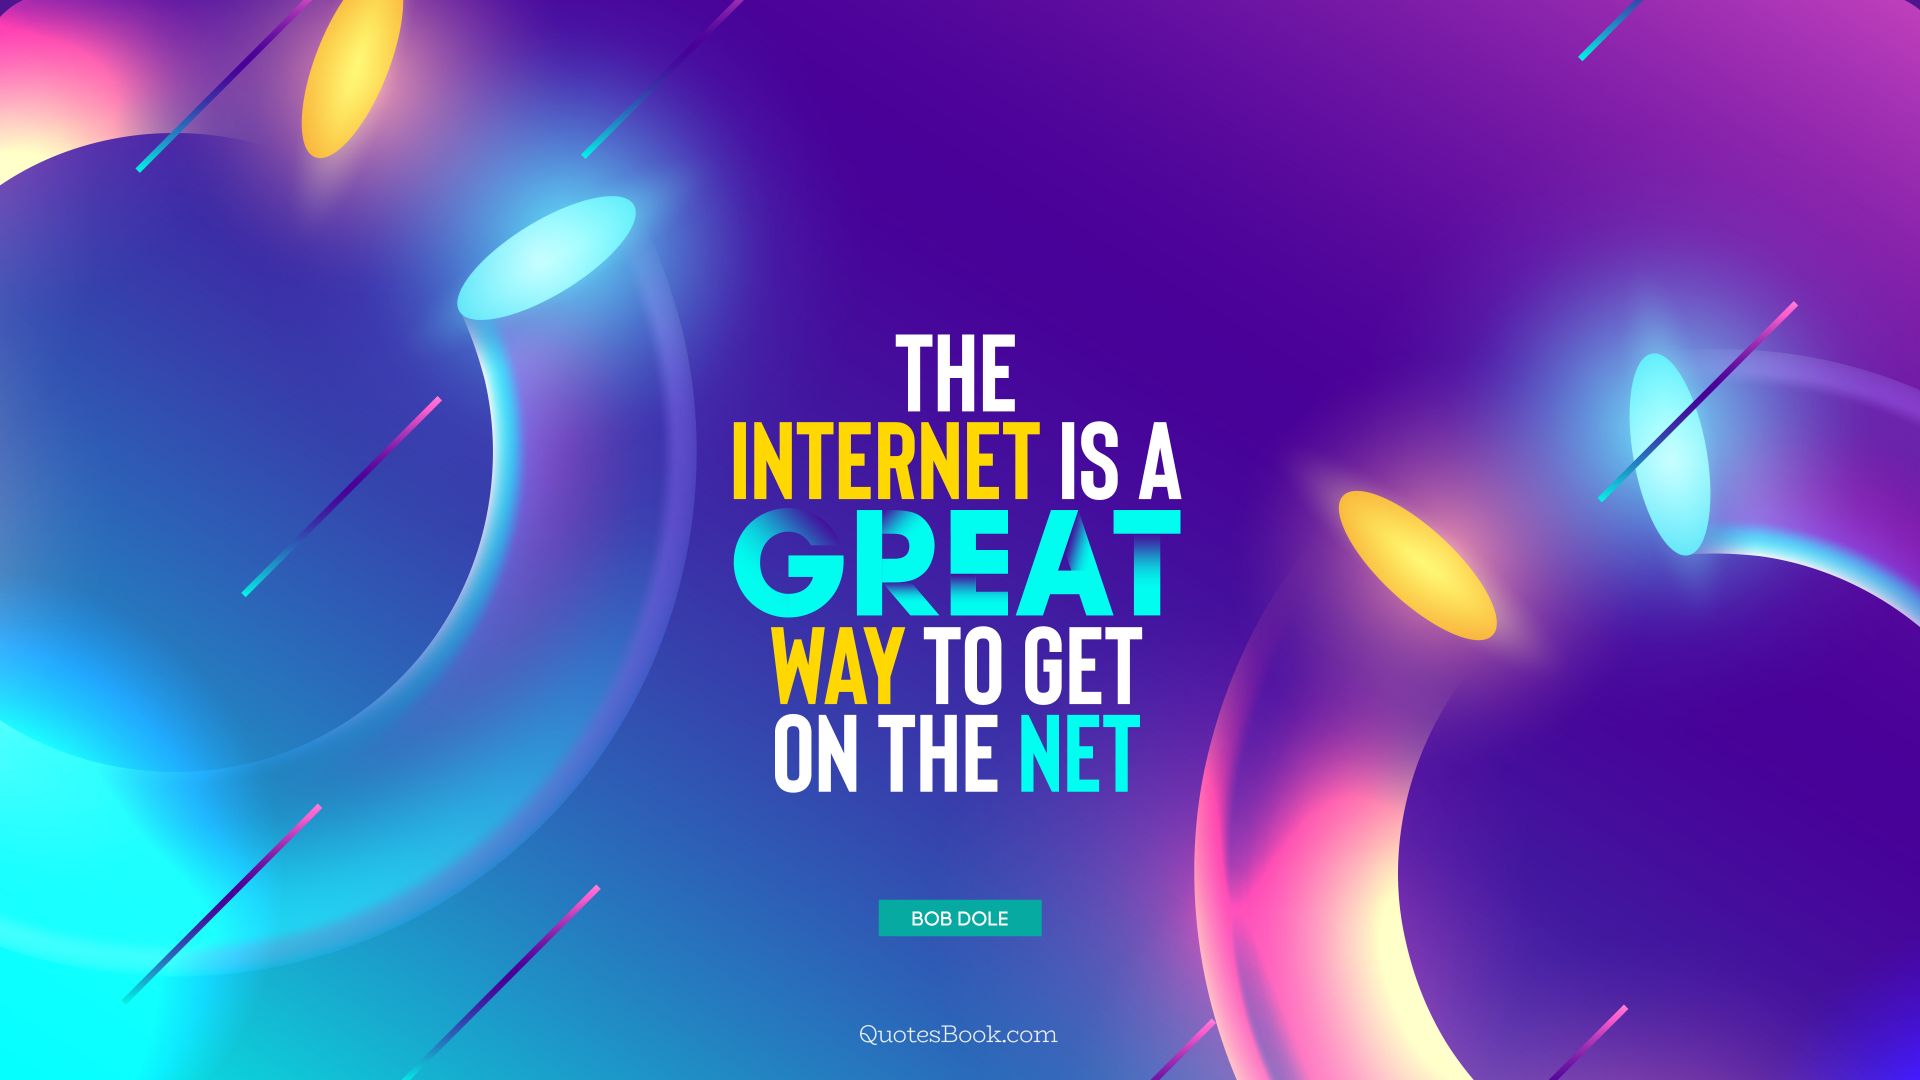 The internet is a great way to get on the net. - Quote by Bob Dole